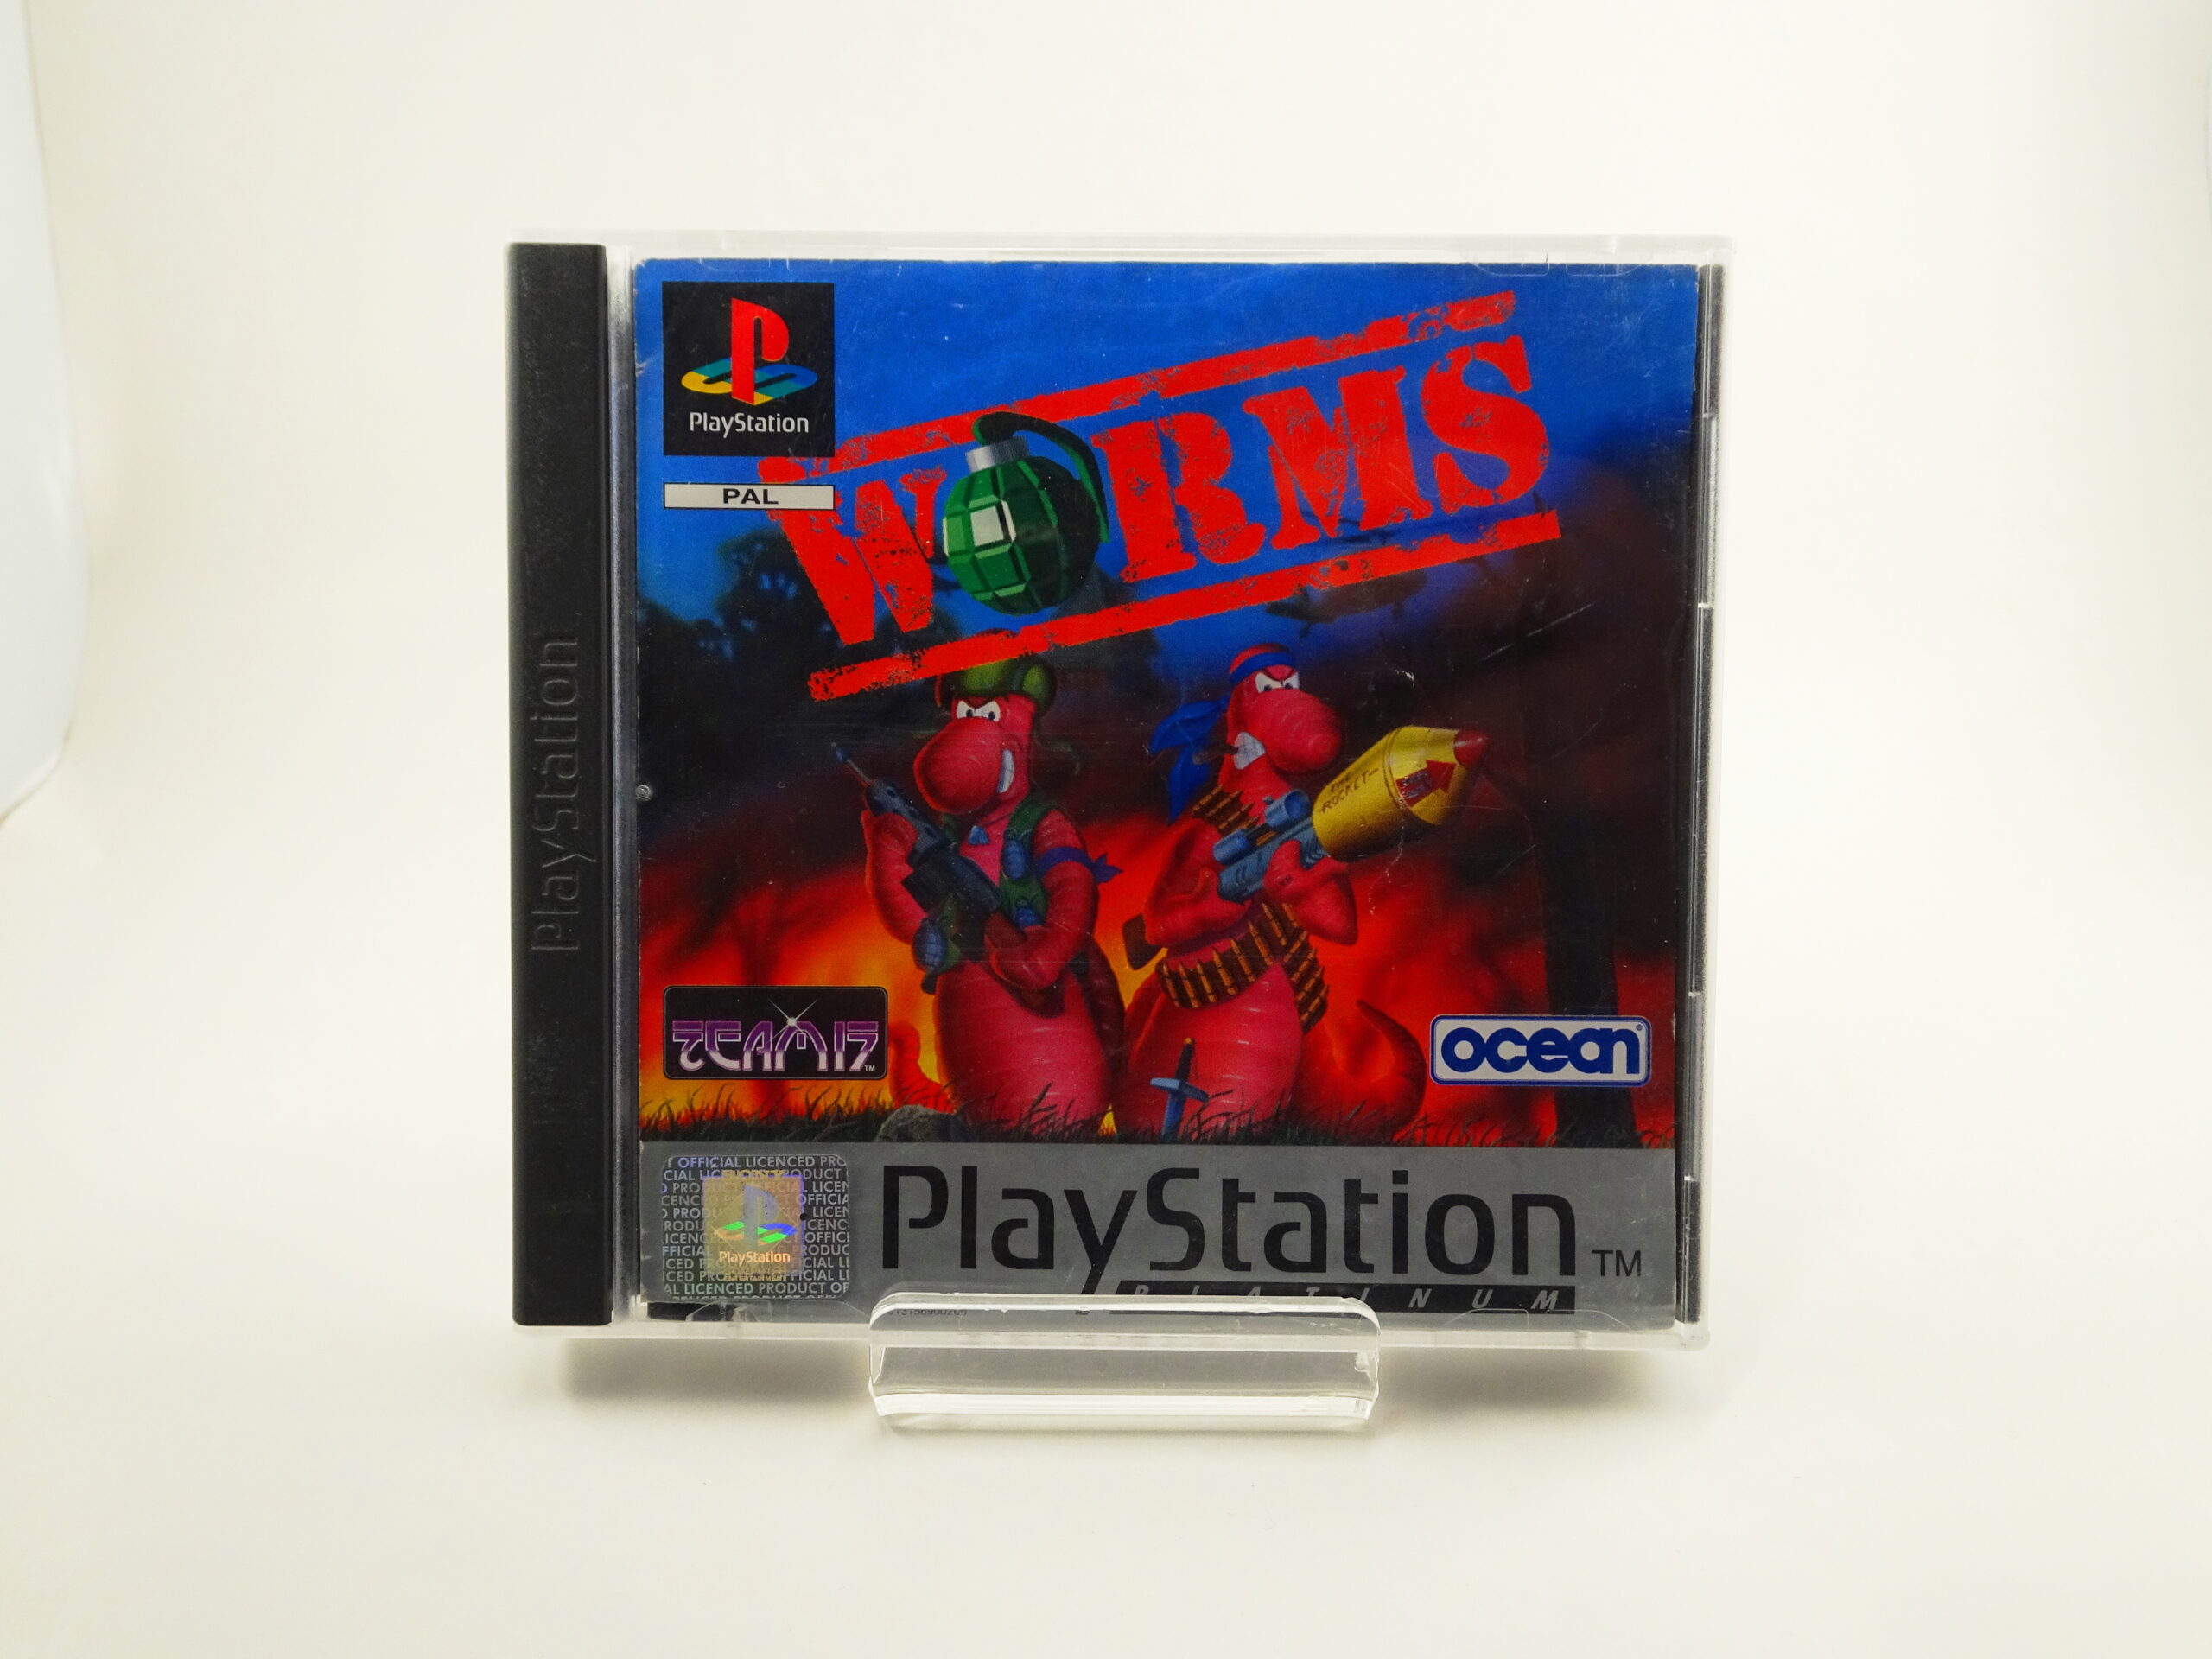 Worms (PS1)